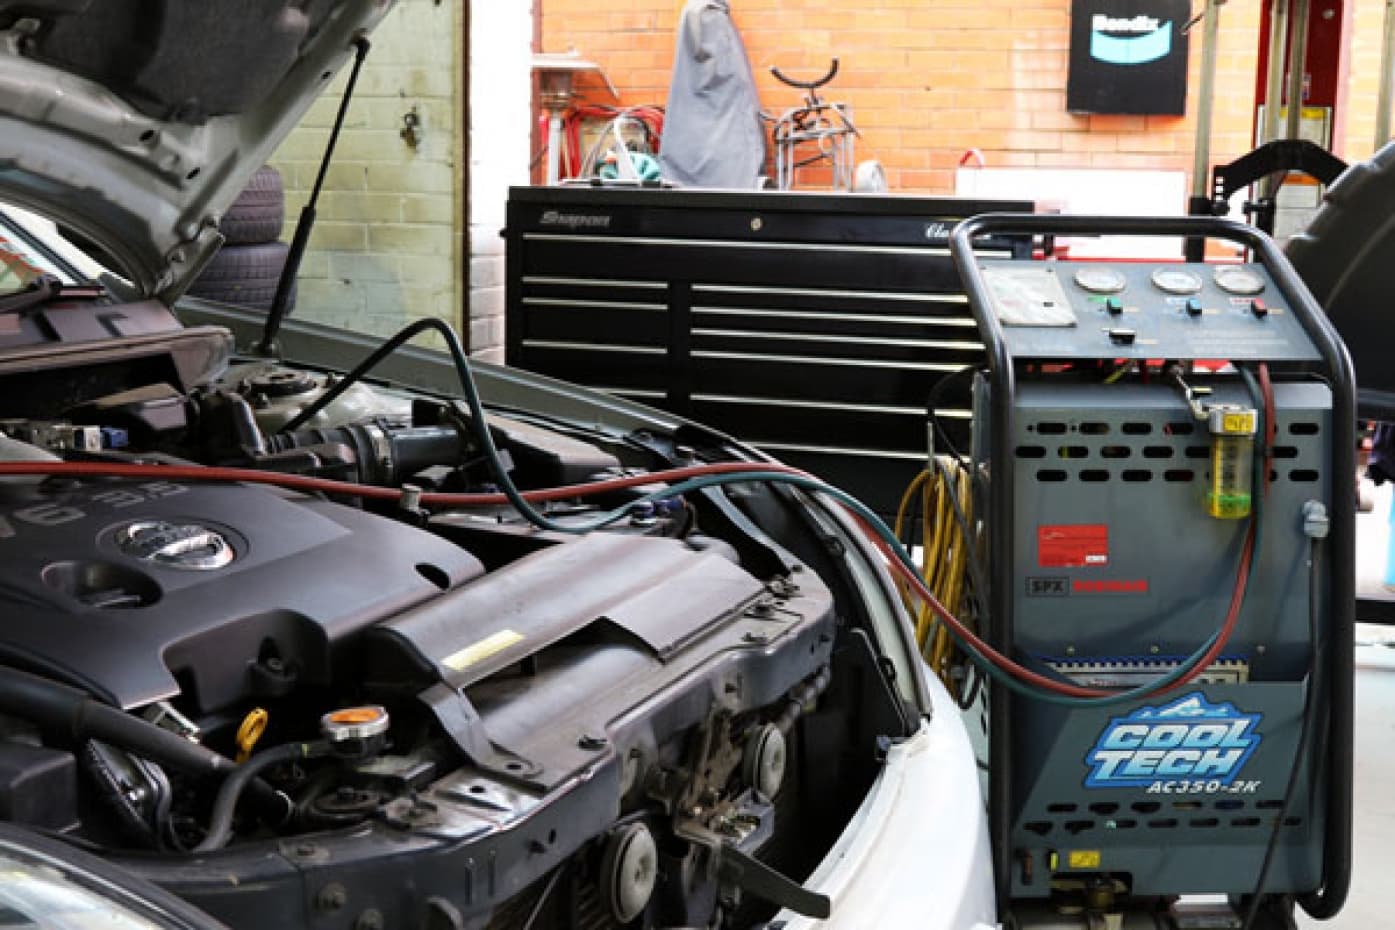 Auto Air Conditioning Service Cheltenham - At Stuart Hunter Motors, we provide expert auto air conditioning services for all vehicle makes and models, including 4WDs, across Melbourne’s southeast suburbs.